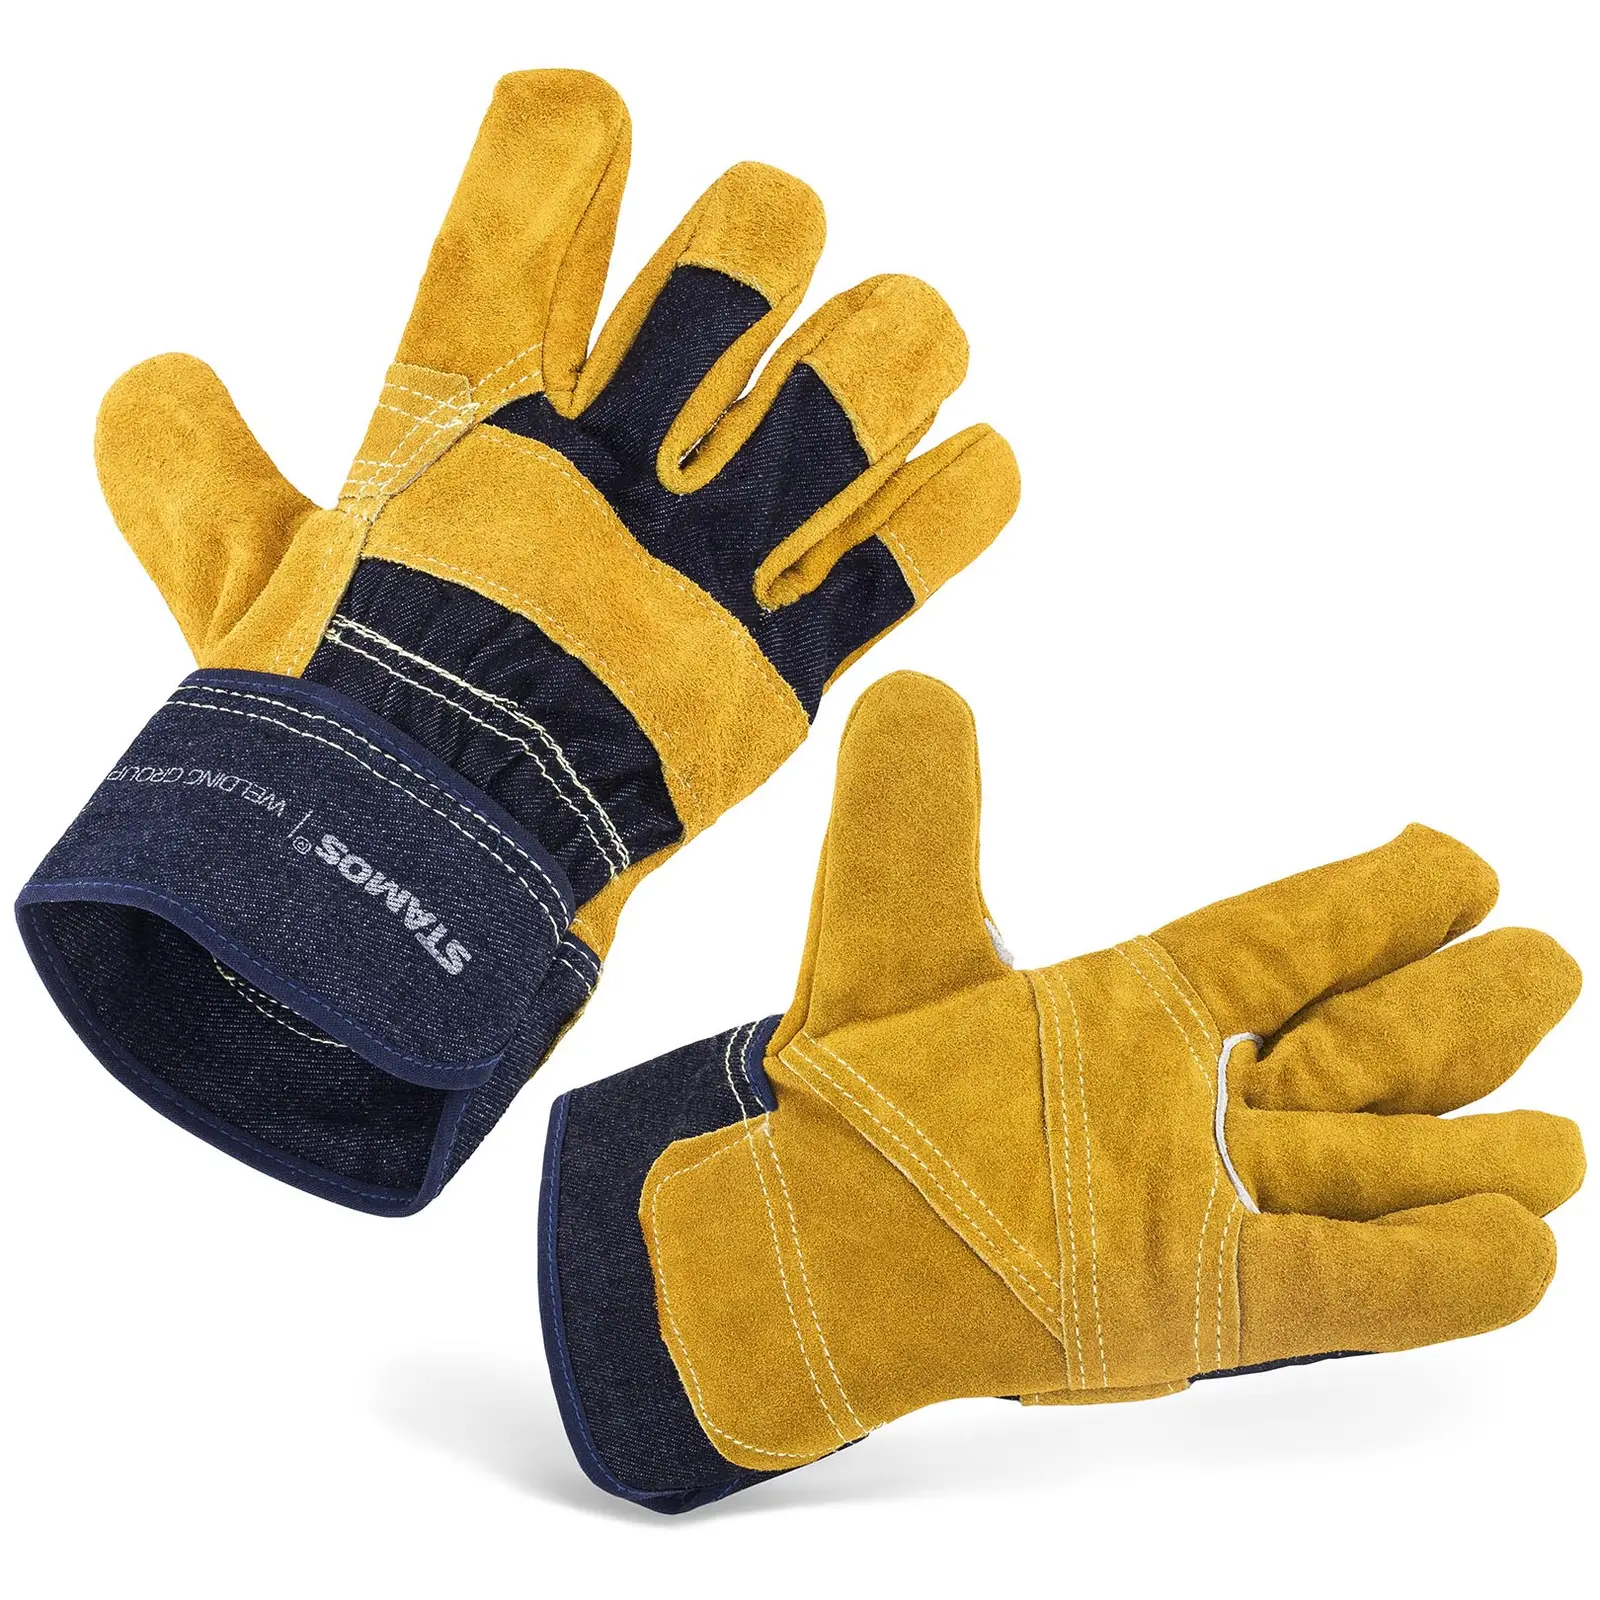 Work gloves - size. M - lined